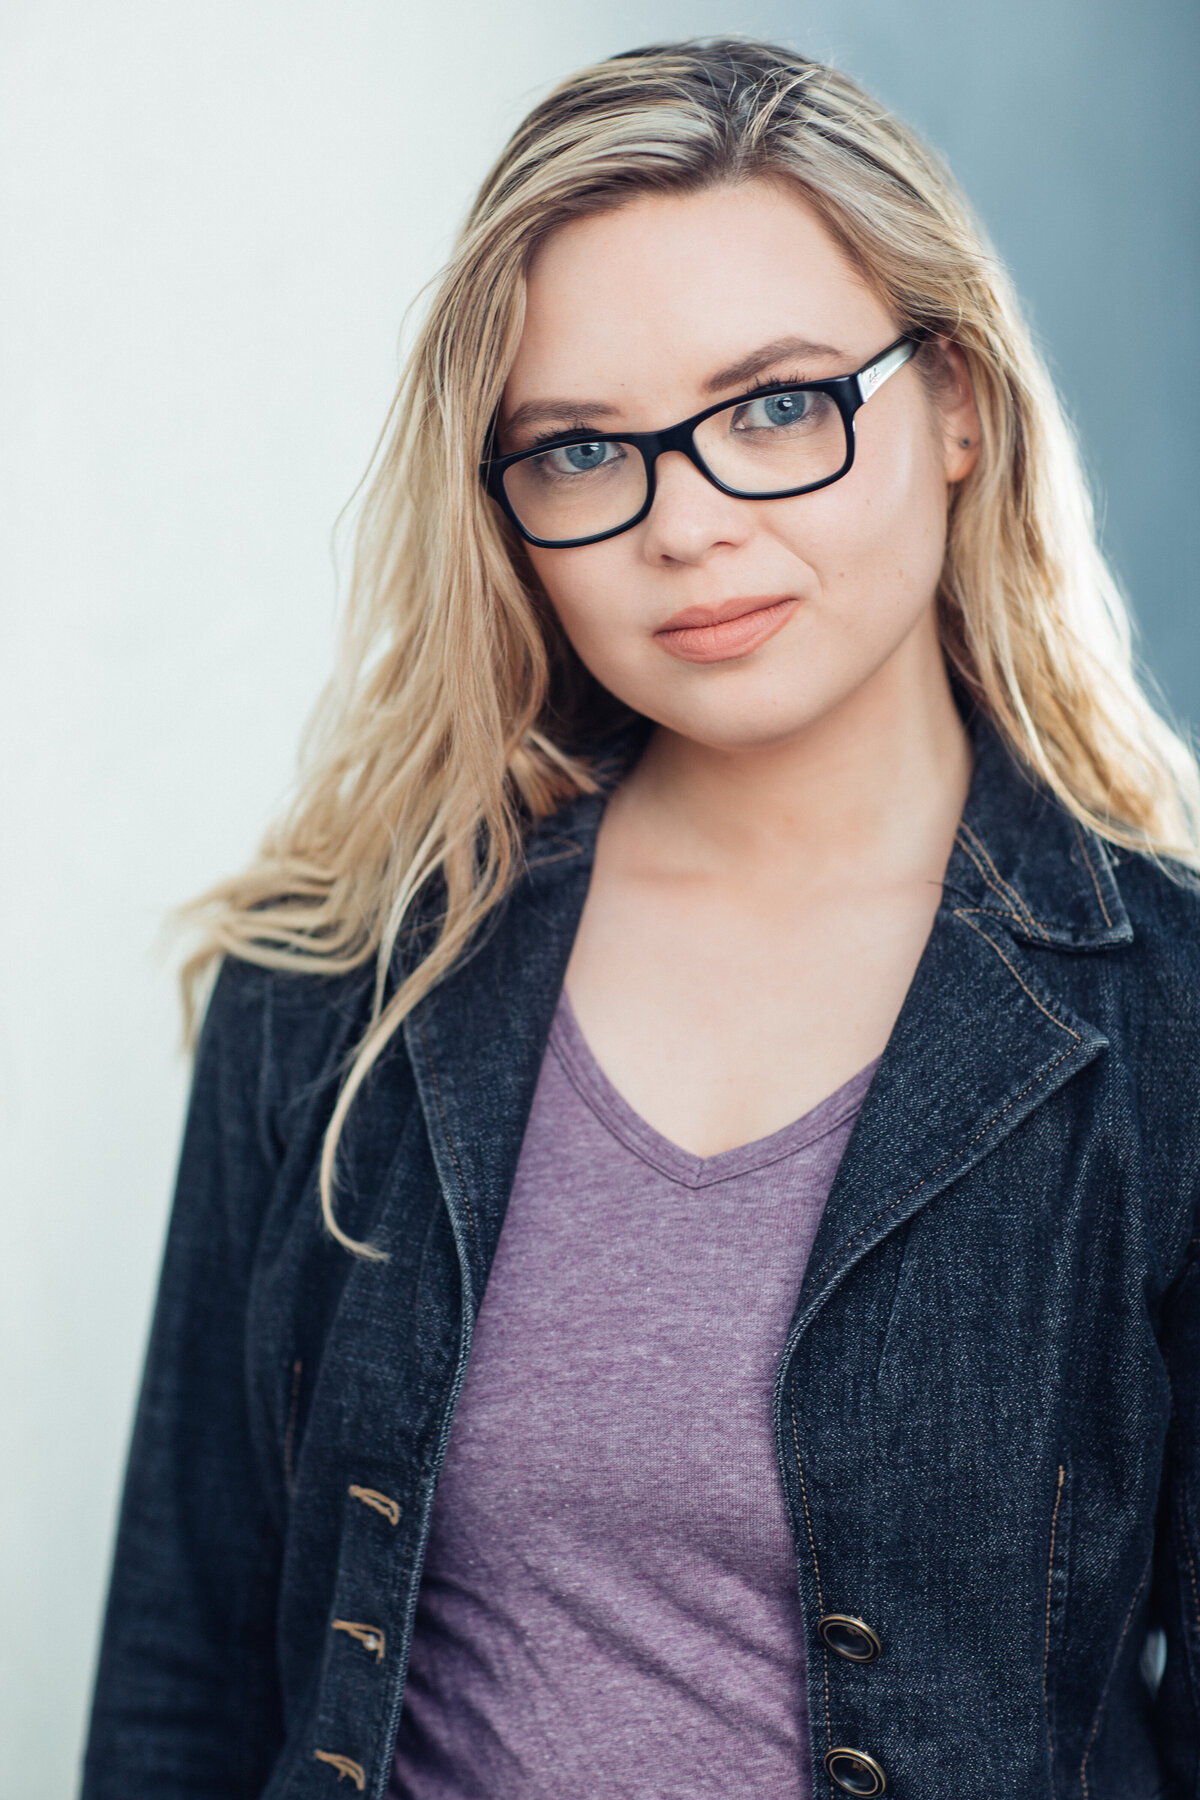 Headshot Photograph Of Young Woman In Outer Black Jacket And Inner Violet V-Neck Shirt Los Angeles